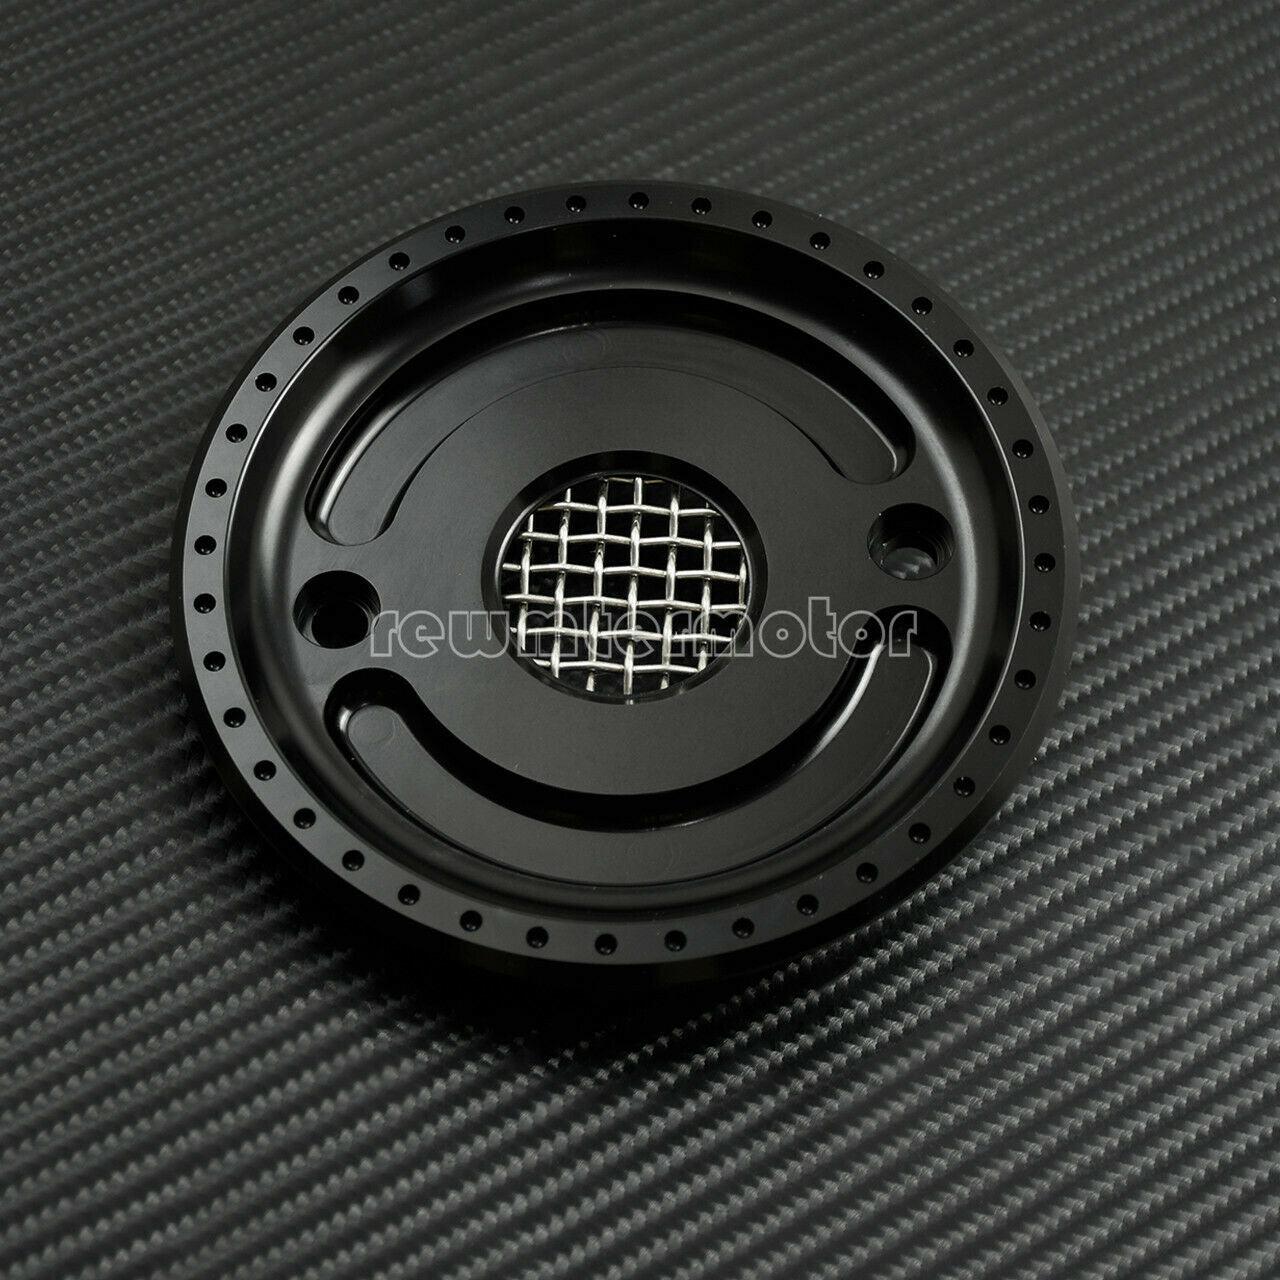 Front Pulley Cover Fit For Harley Sportster 883 2004-2015 2016 2017 Gloss Black - Moto Life Products